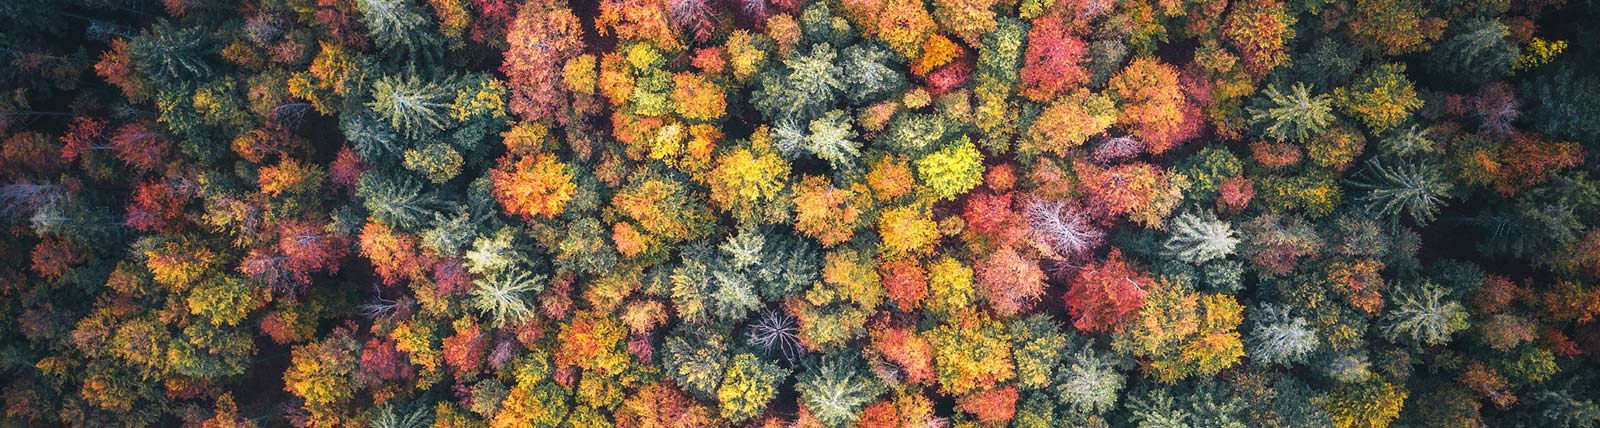 Arial view of a forest in the fall